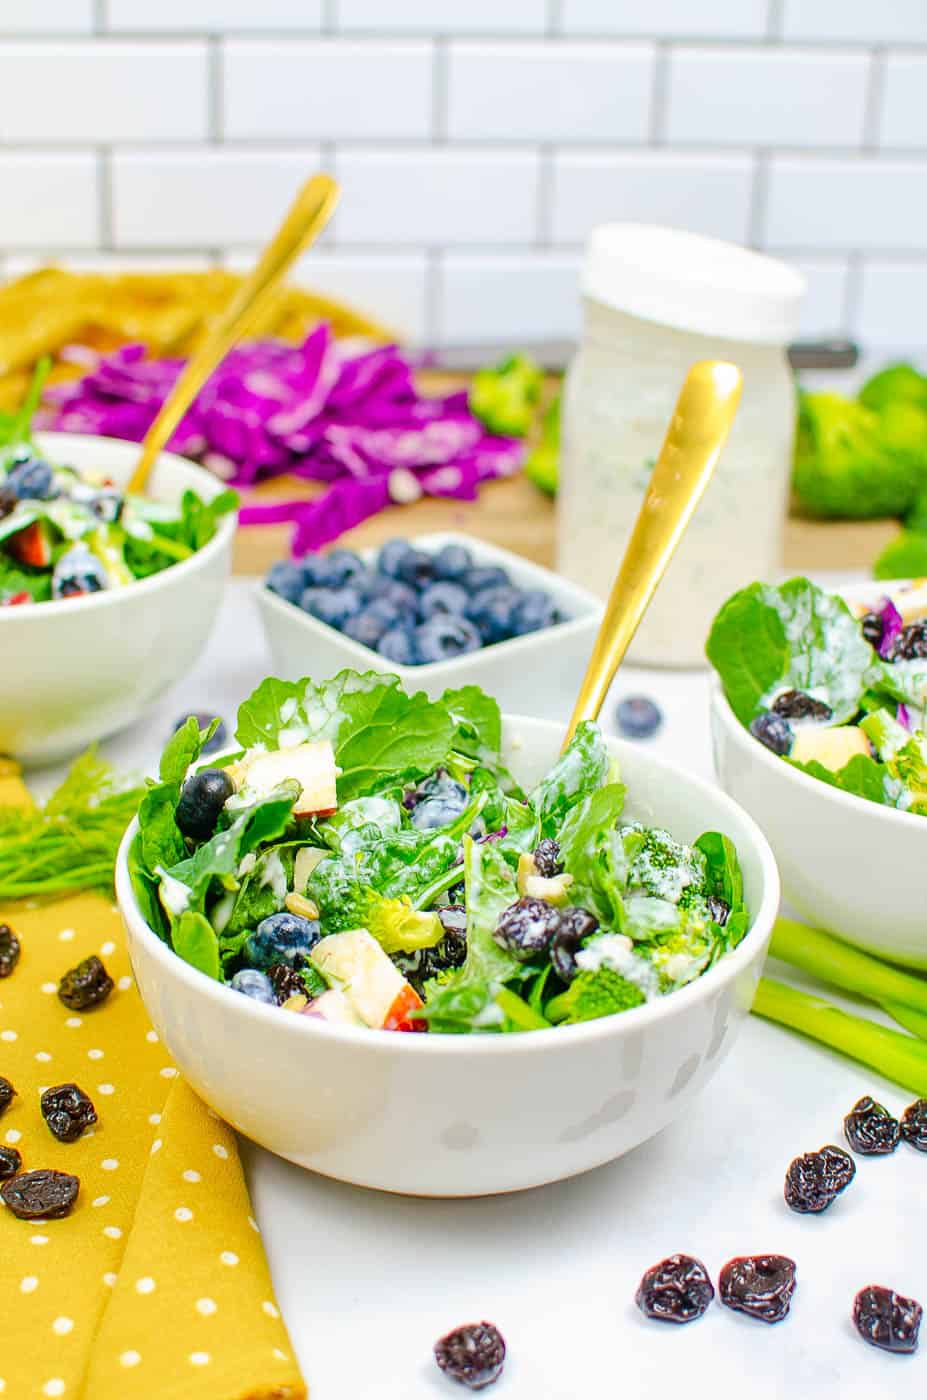 superfood salad served in a white bowl with broccoli, blueberries, sweet Fuji apples, cabbage, spinach, dried cherries, pine nuts, and a healthy ranch dressing